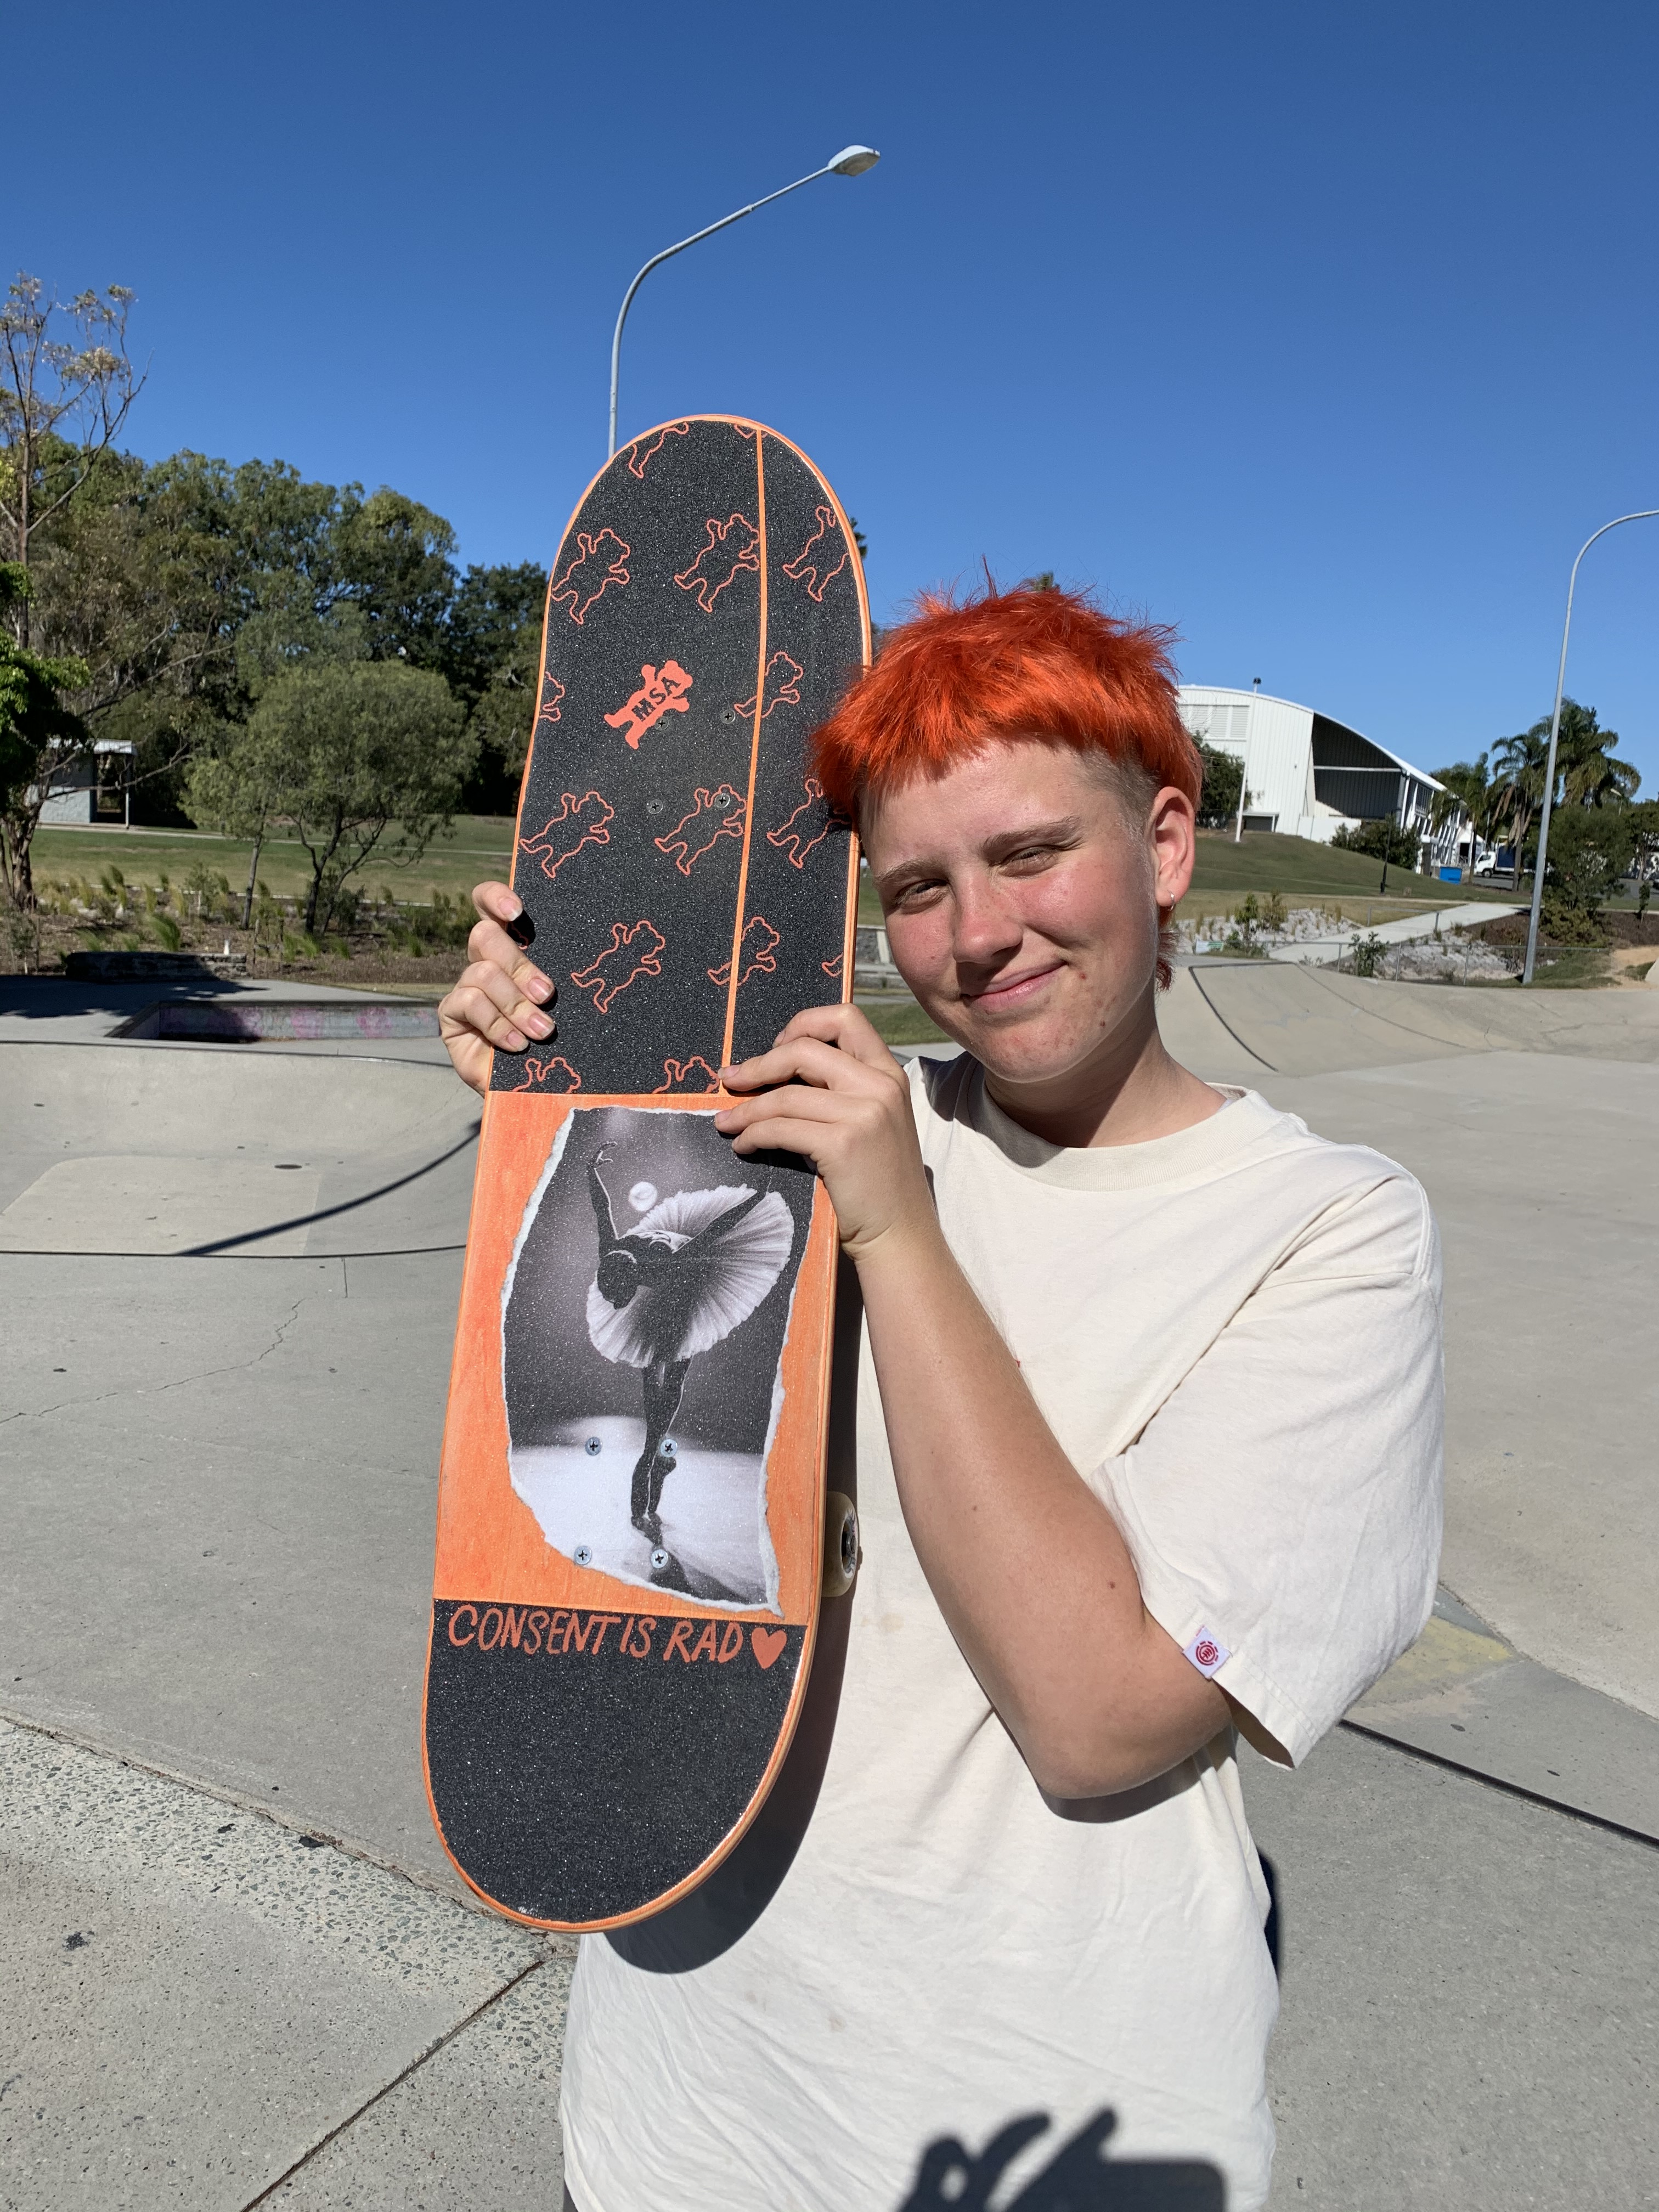 Millie is outdoor at a skatepark with a skate deck saying consent is rad in the sun. Her orange grip tape matches her